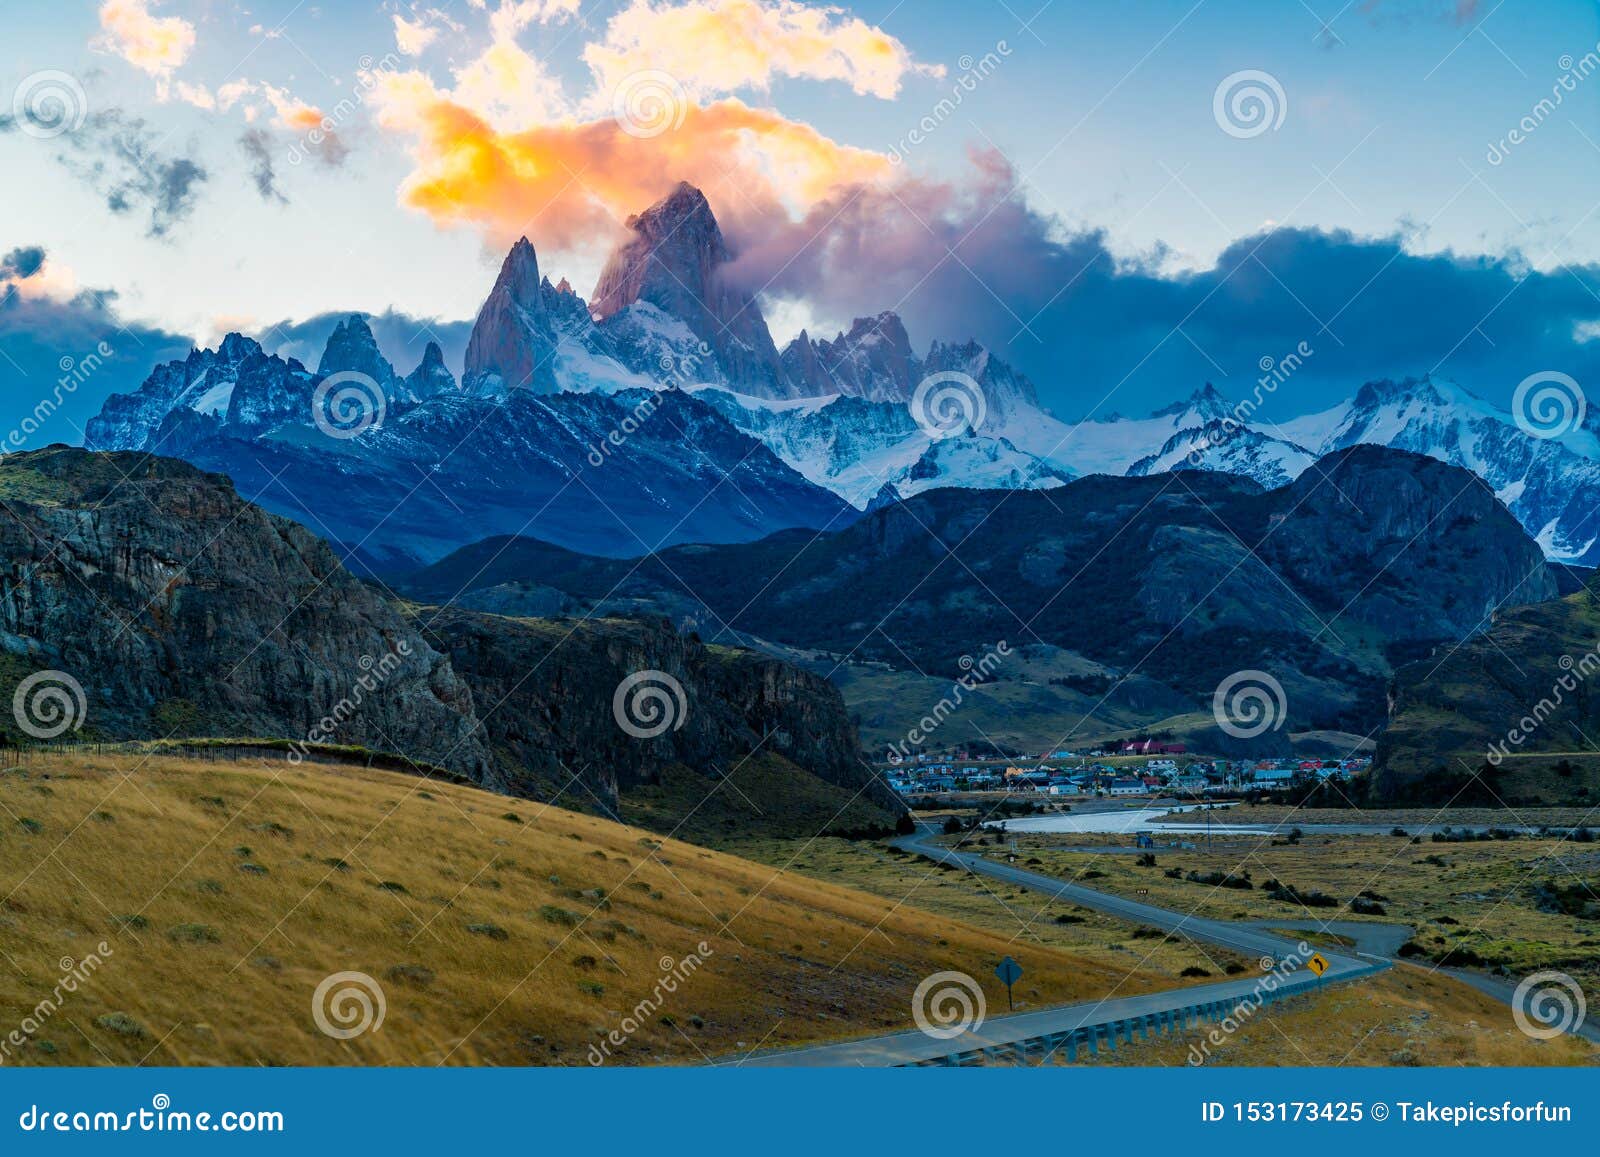 view of the famous mount fitz roy or cirro fitz roy at el chalten village